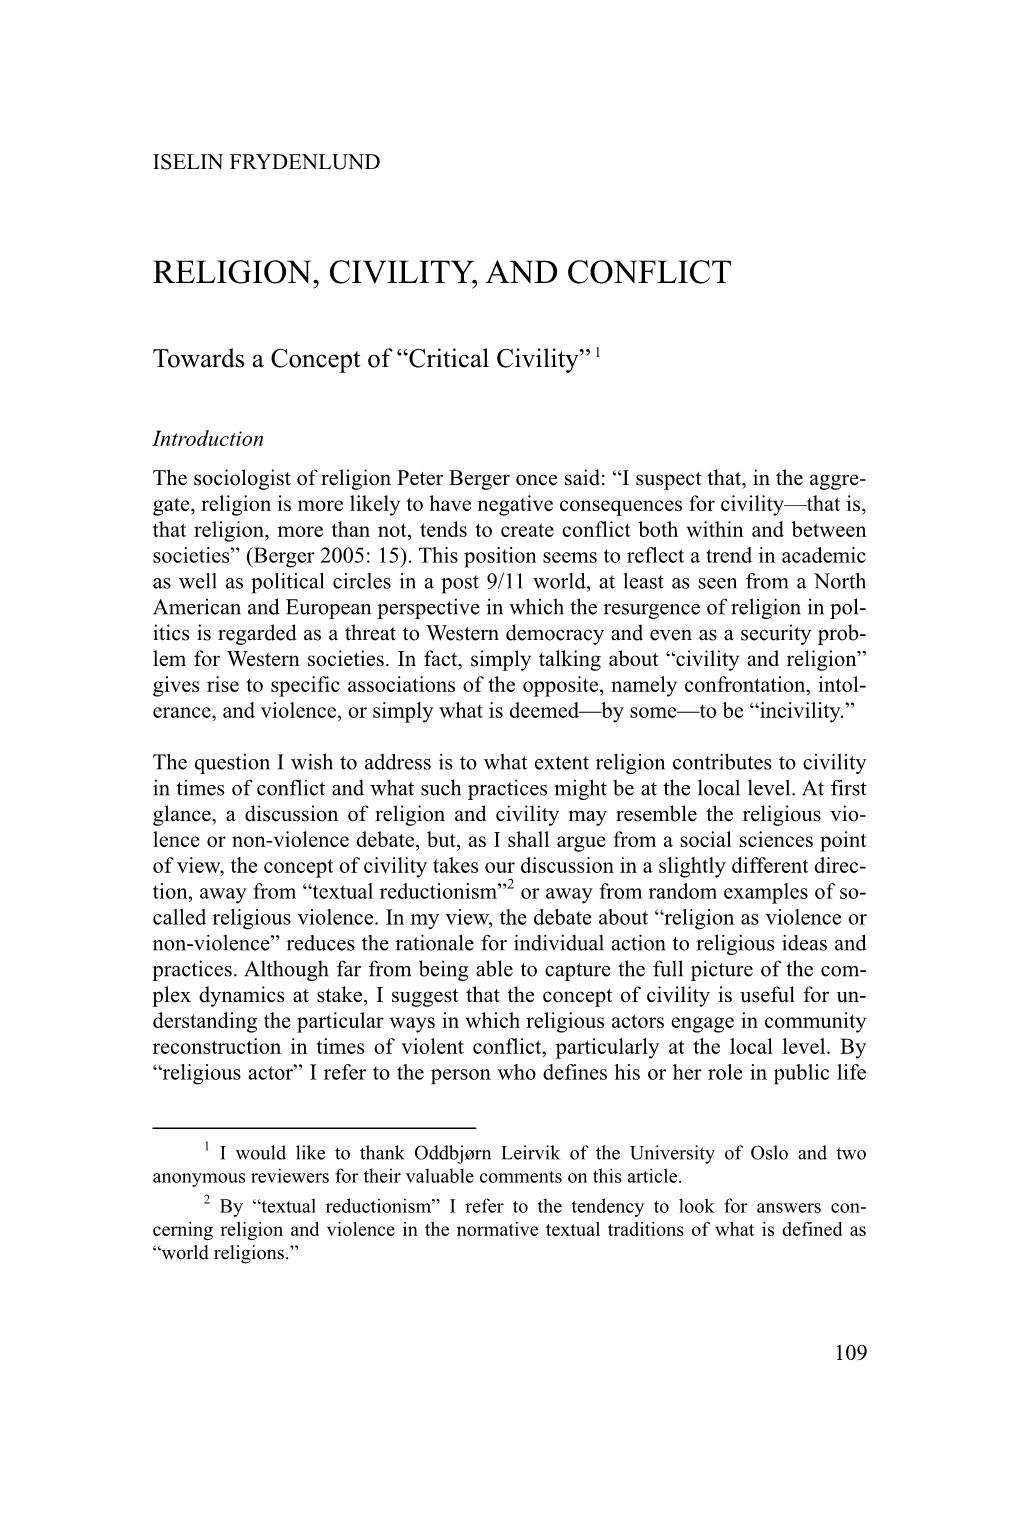 Religion, Civility, and Conflict